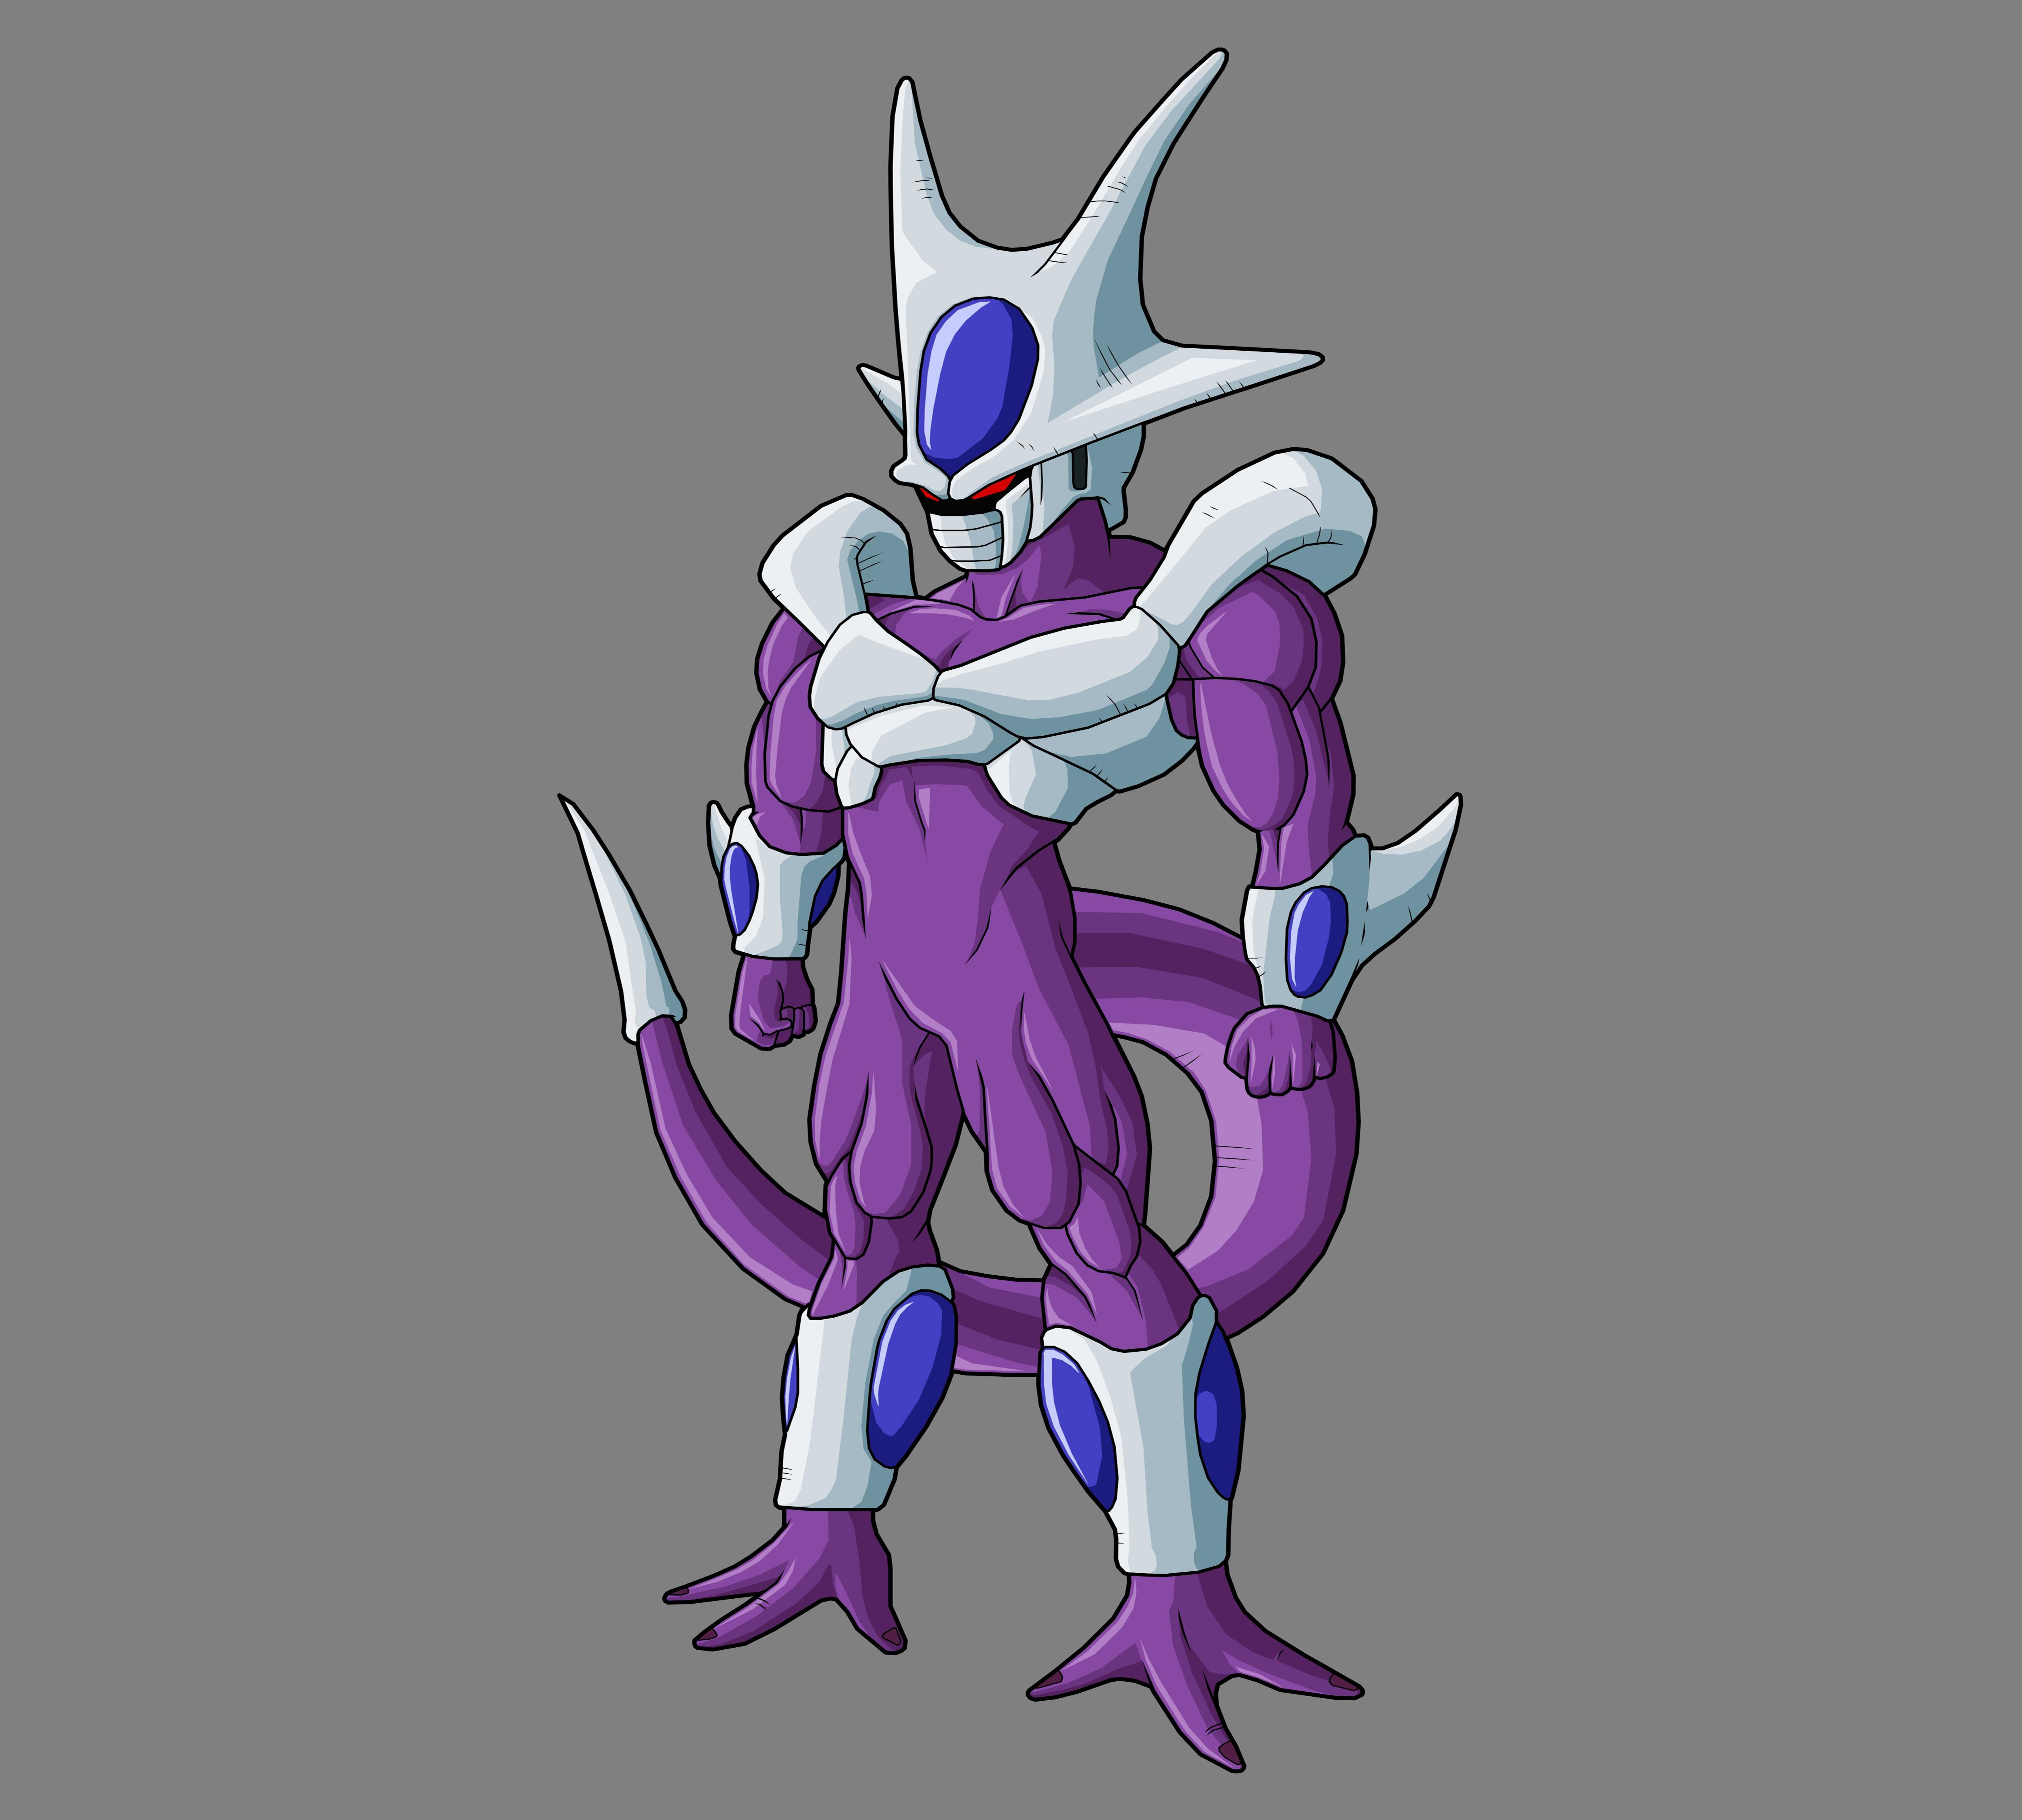 Cooler final form by Drozdoo